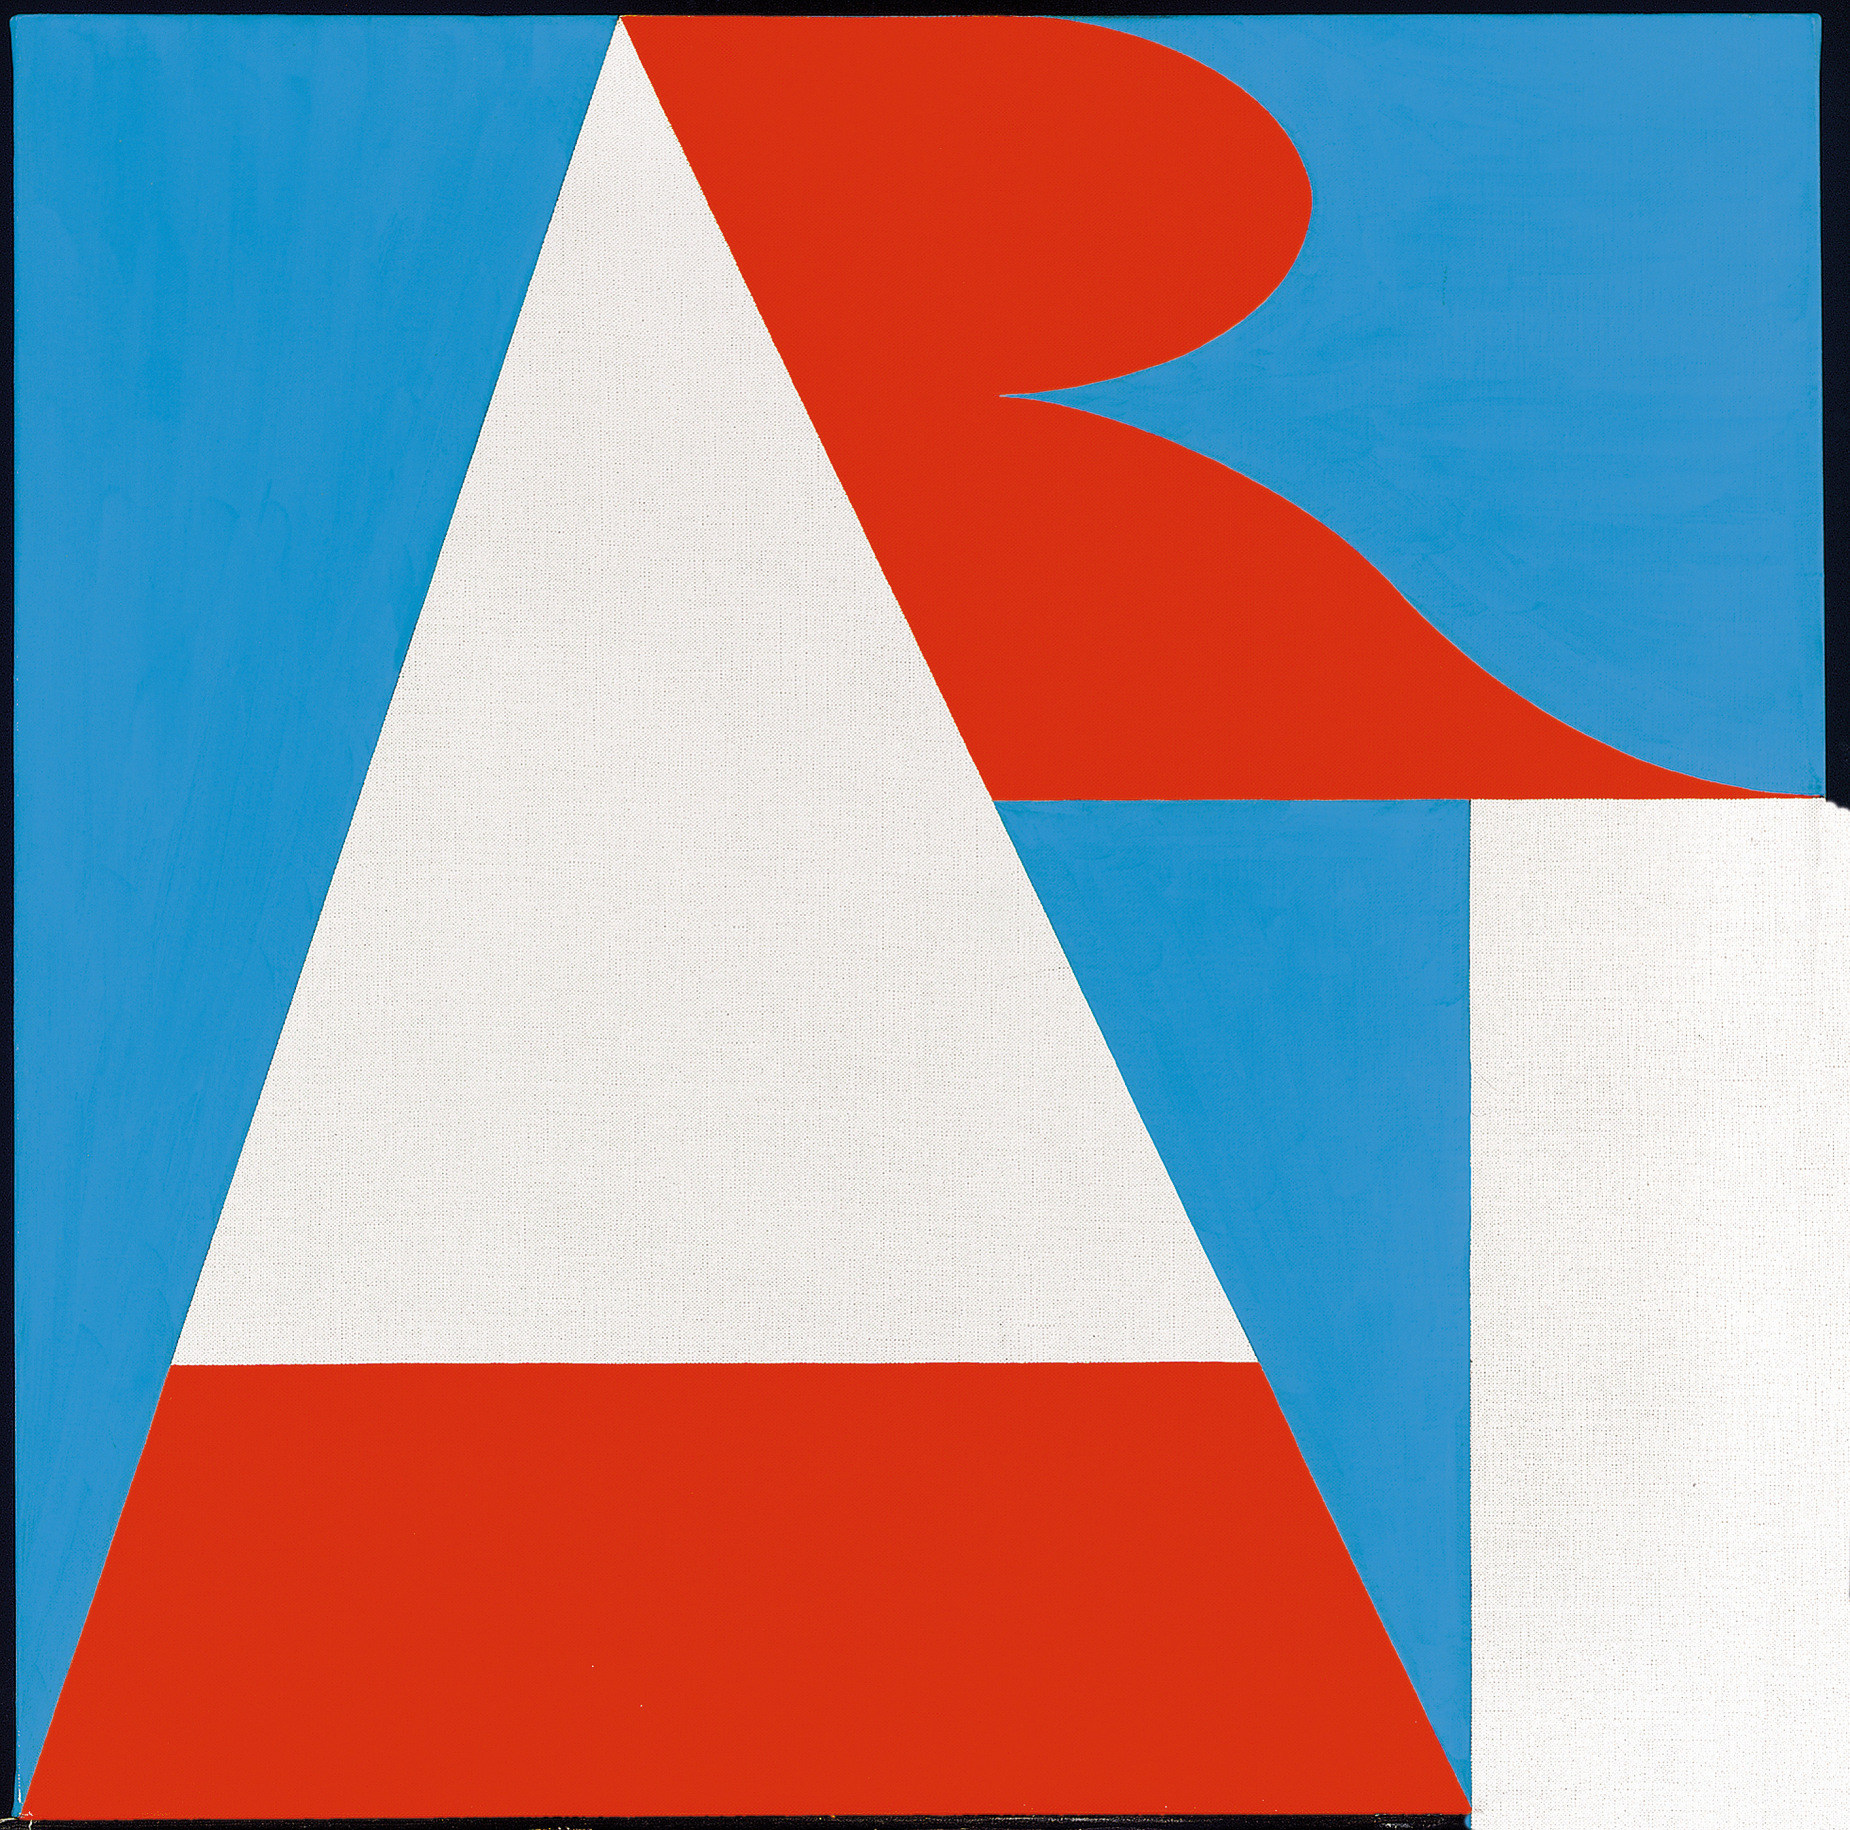 ART is a 24 inch square painting with a blue background spelling the word art. A red and white letter &quot;A&rdquo; forms a supporting structure that the red &ldquo;R&rdquo; and a white &ldquo;T&rdquo; lean against.